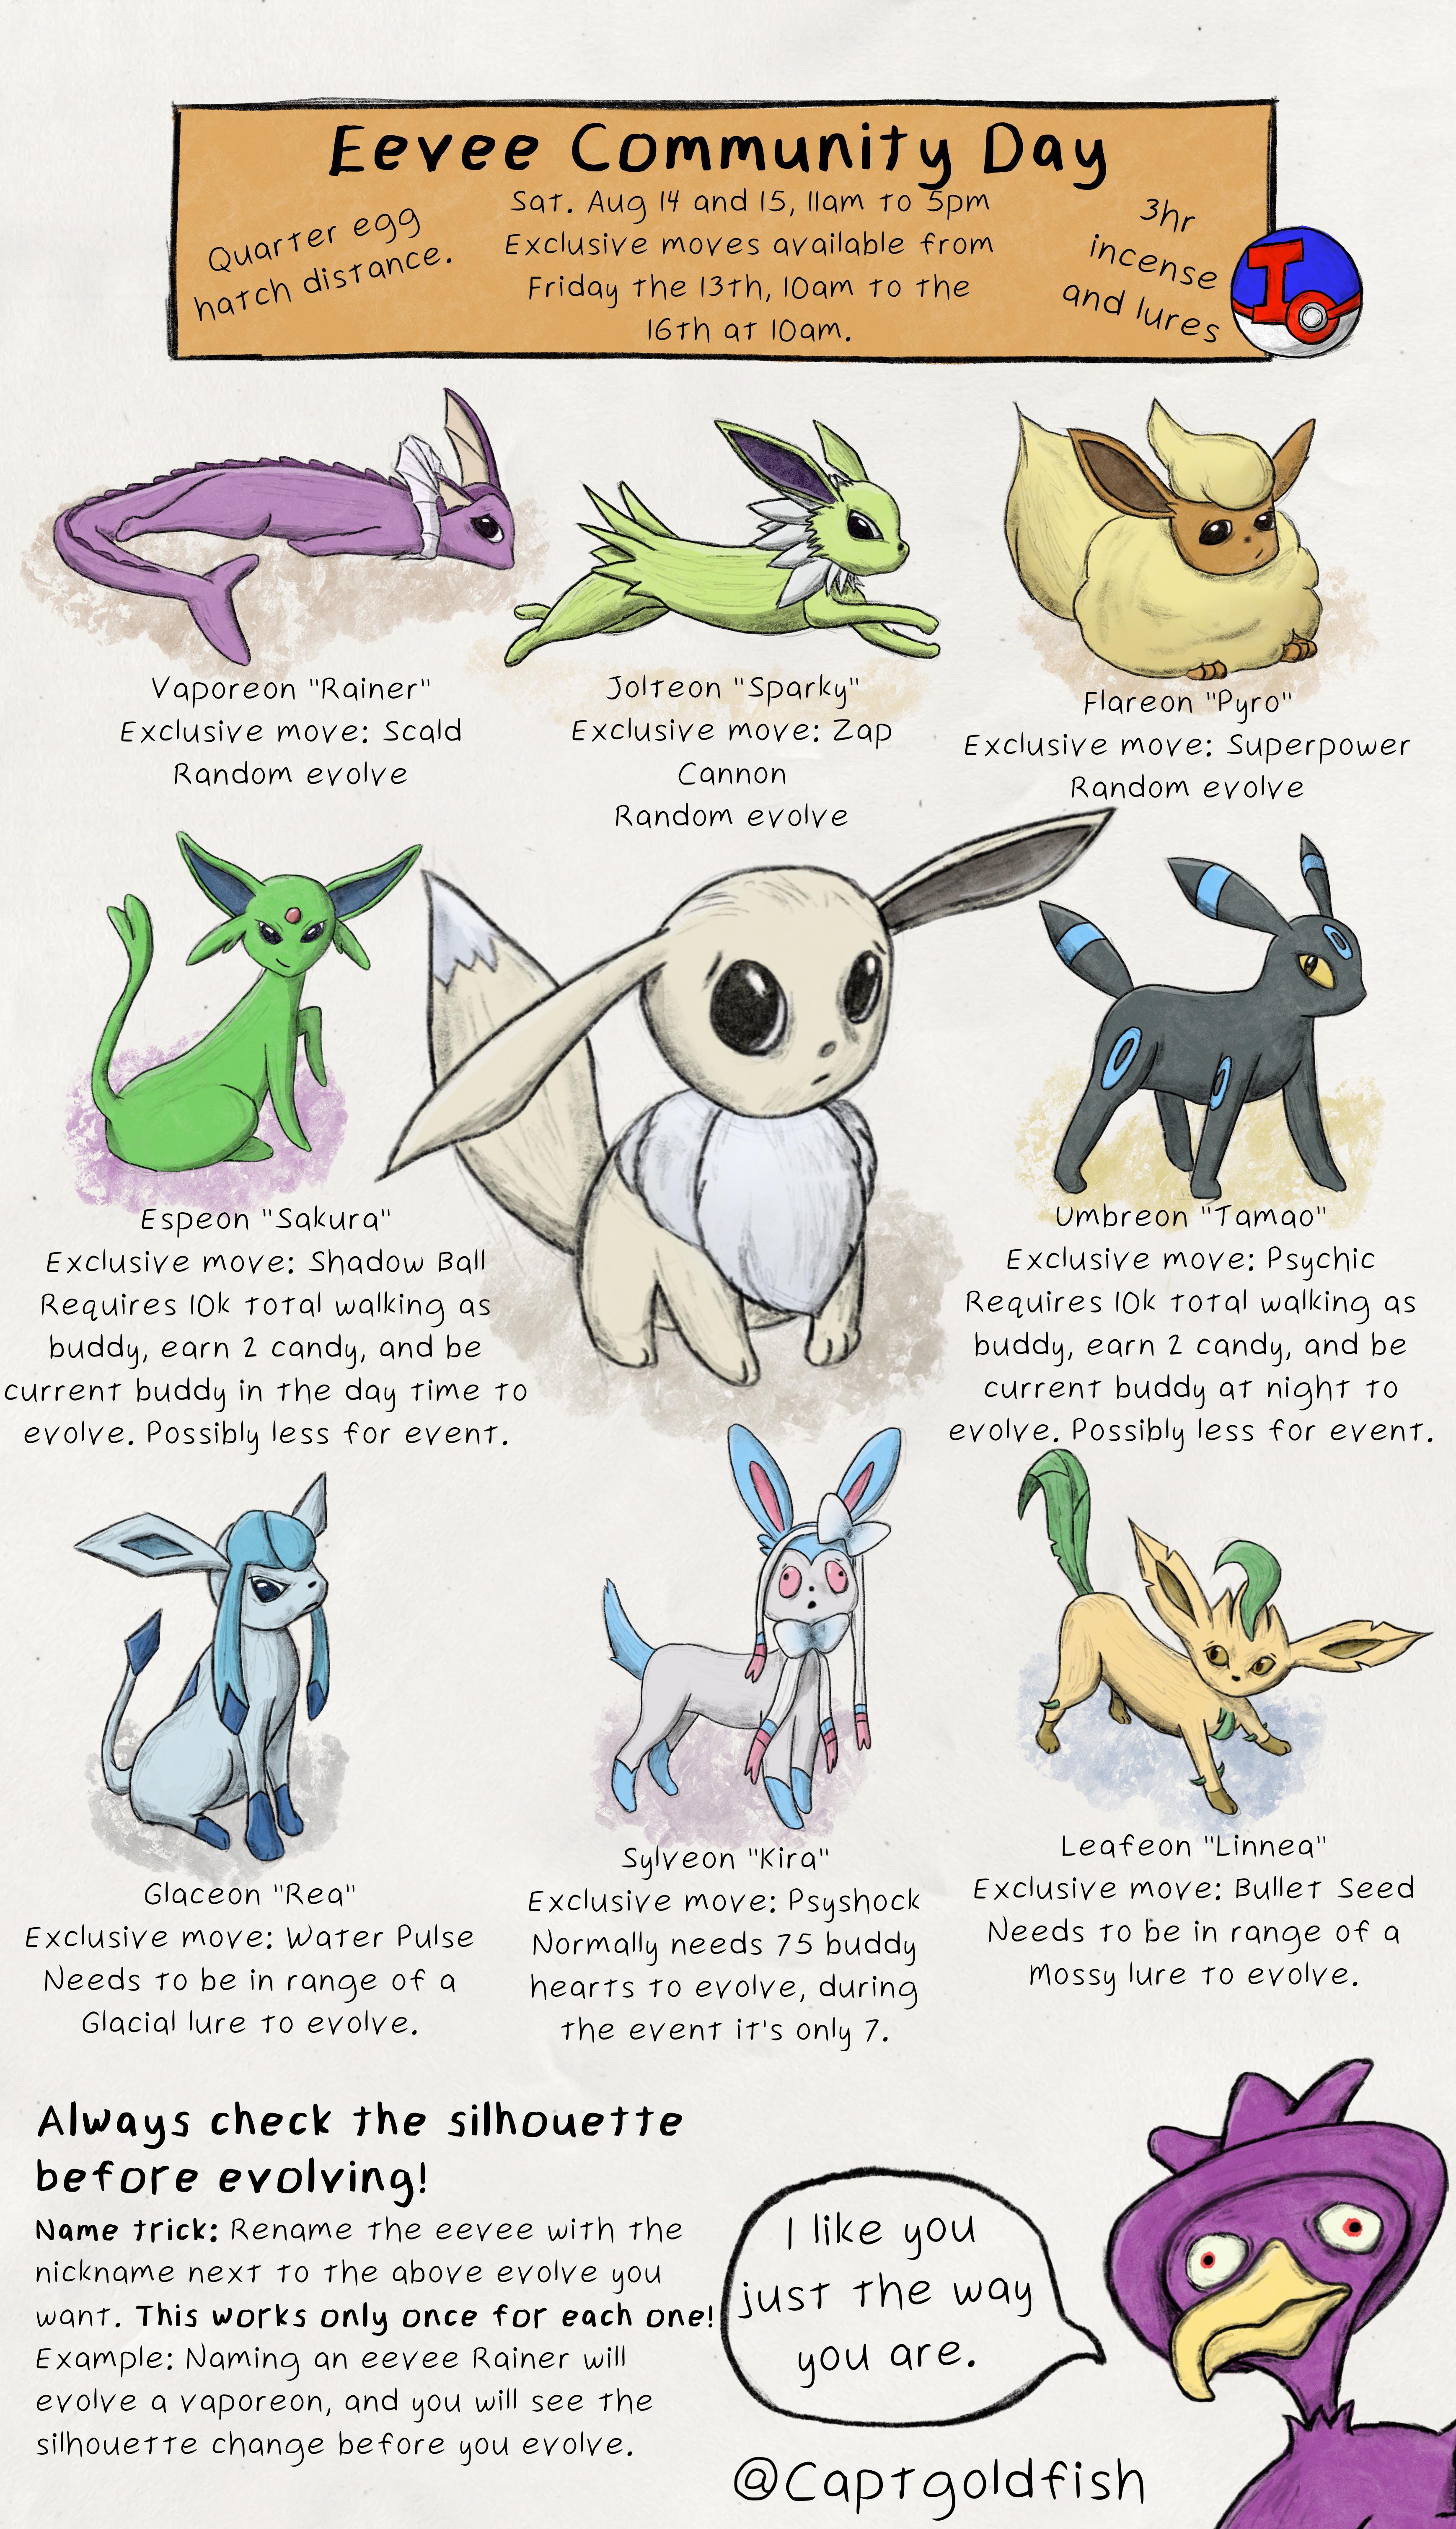 A Full Guide About Eevee Different Evolutions in Pokemon Go